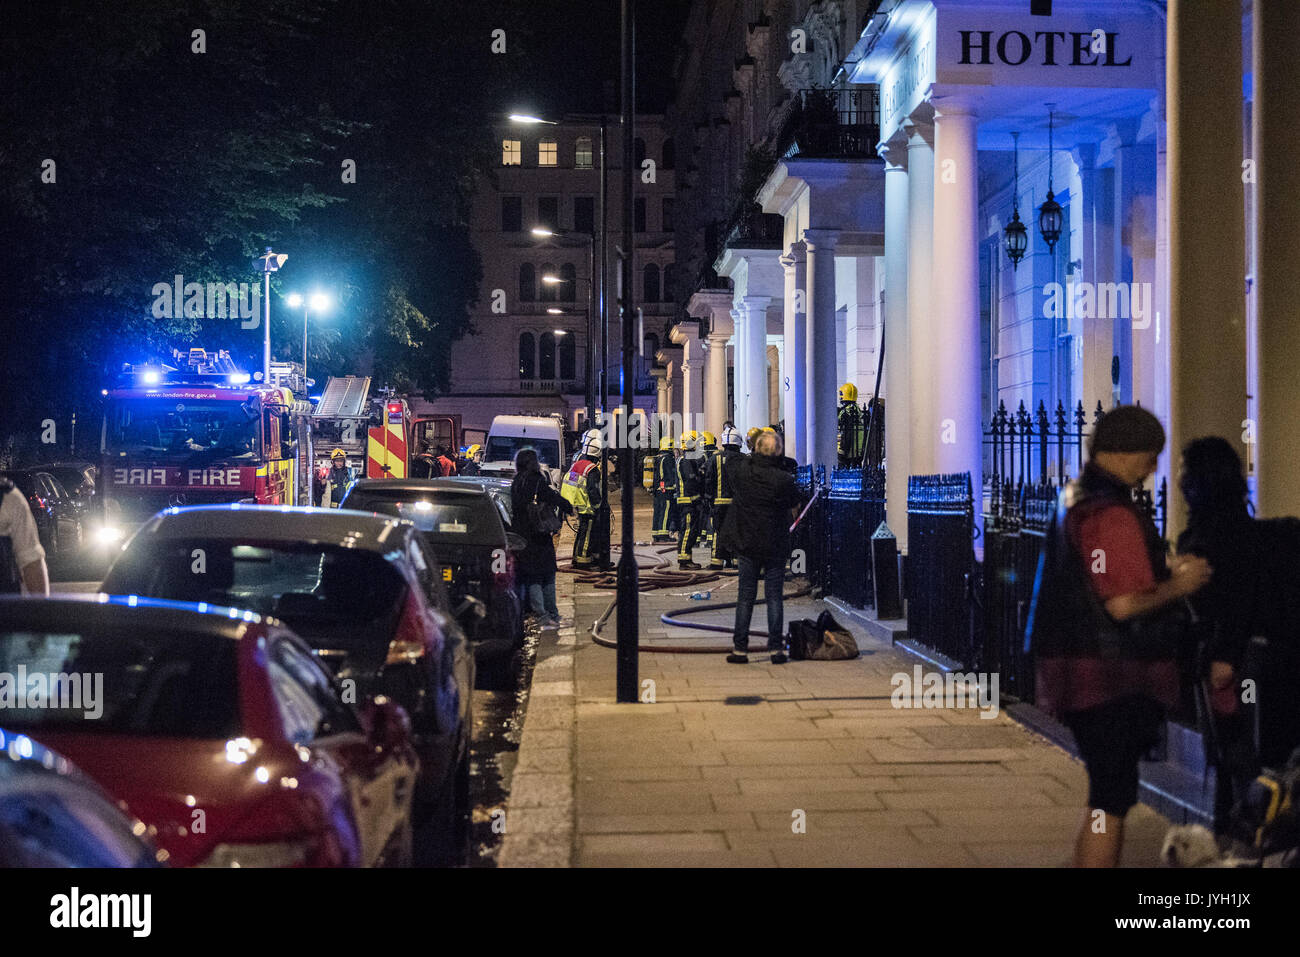 London, UK. 19th Aug, 2017. Eight fire engines and 58 firefighters were called to a flat fire on Kensington Gardens Square in Bayswater. The fire gutted two flats - one on the third floor and one on the fourth floor of the converted five storey mid-terraced town house. Credit: Peter Manning/Alamy Live News Stock Photo